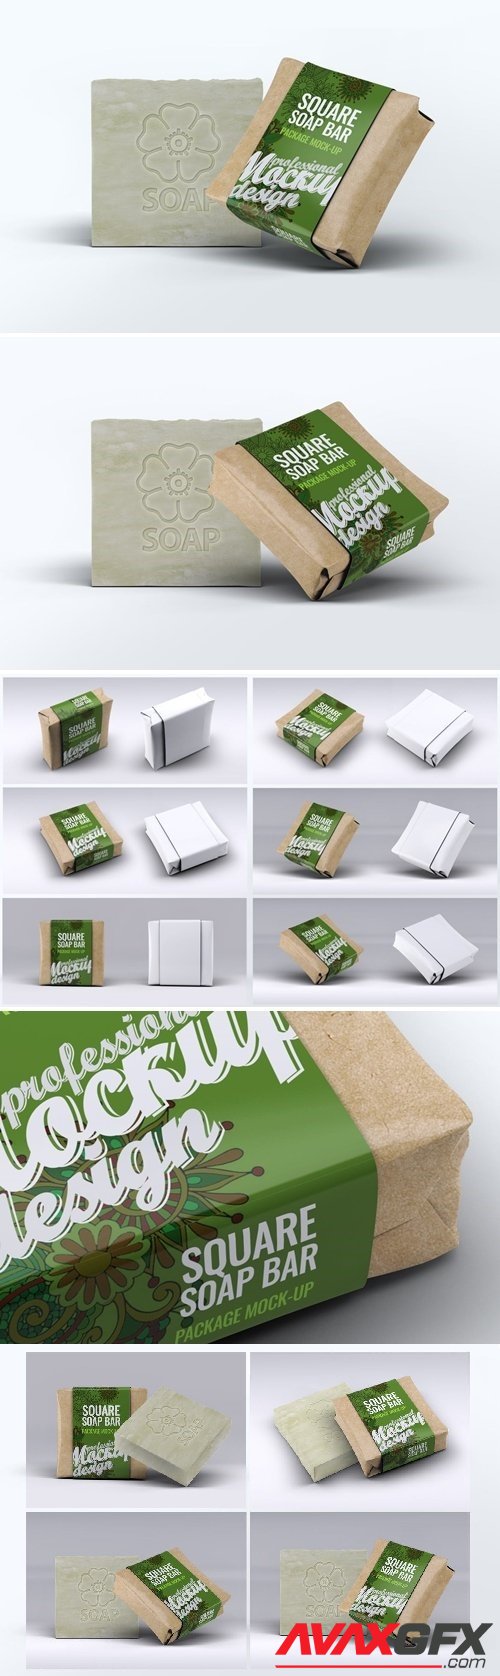 Square Soap Bar Package Mock-up